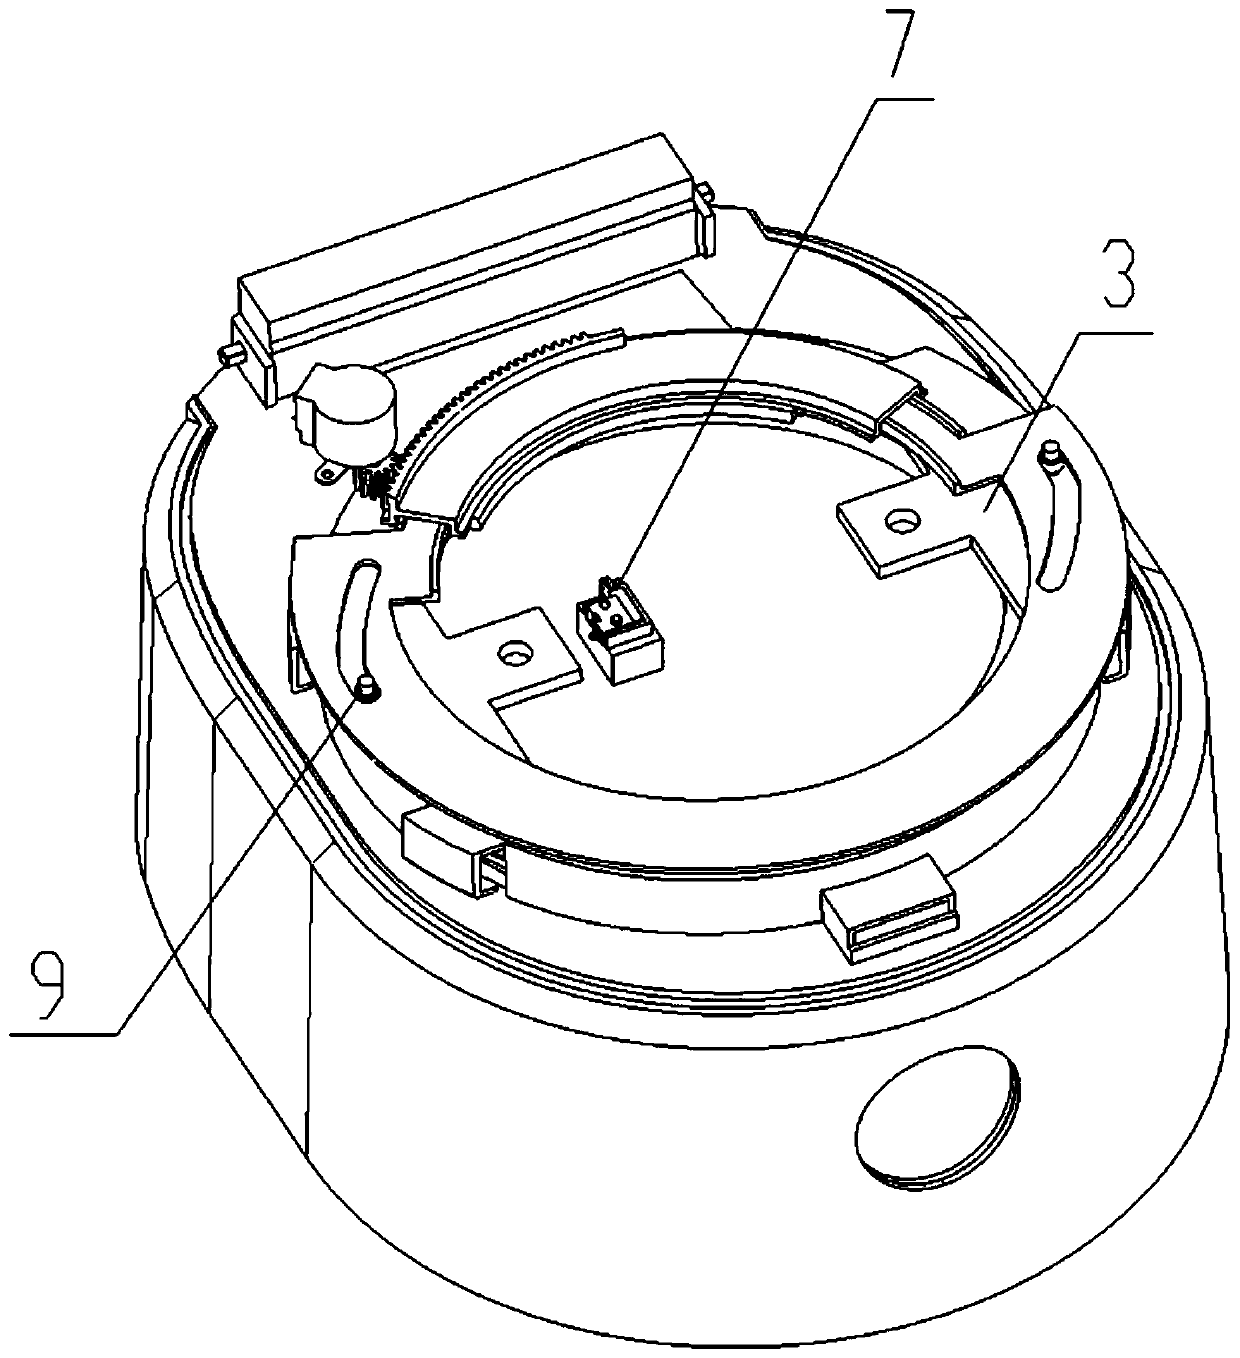 Pot cover opening and closing structure and cooking equipment